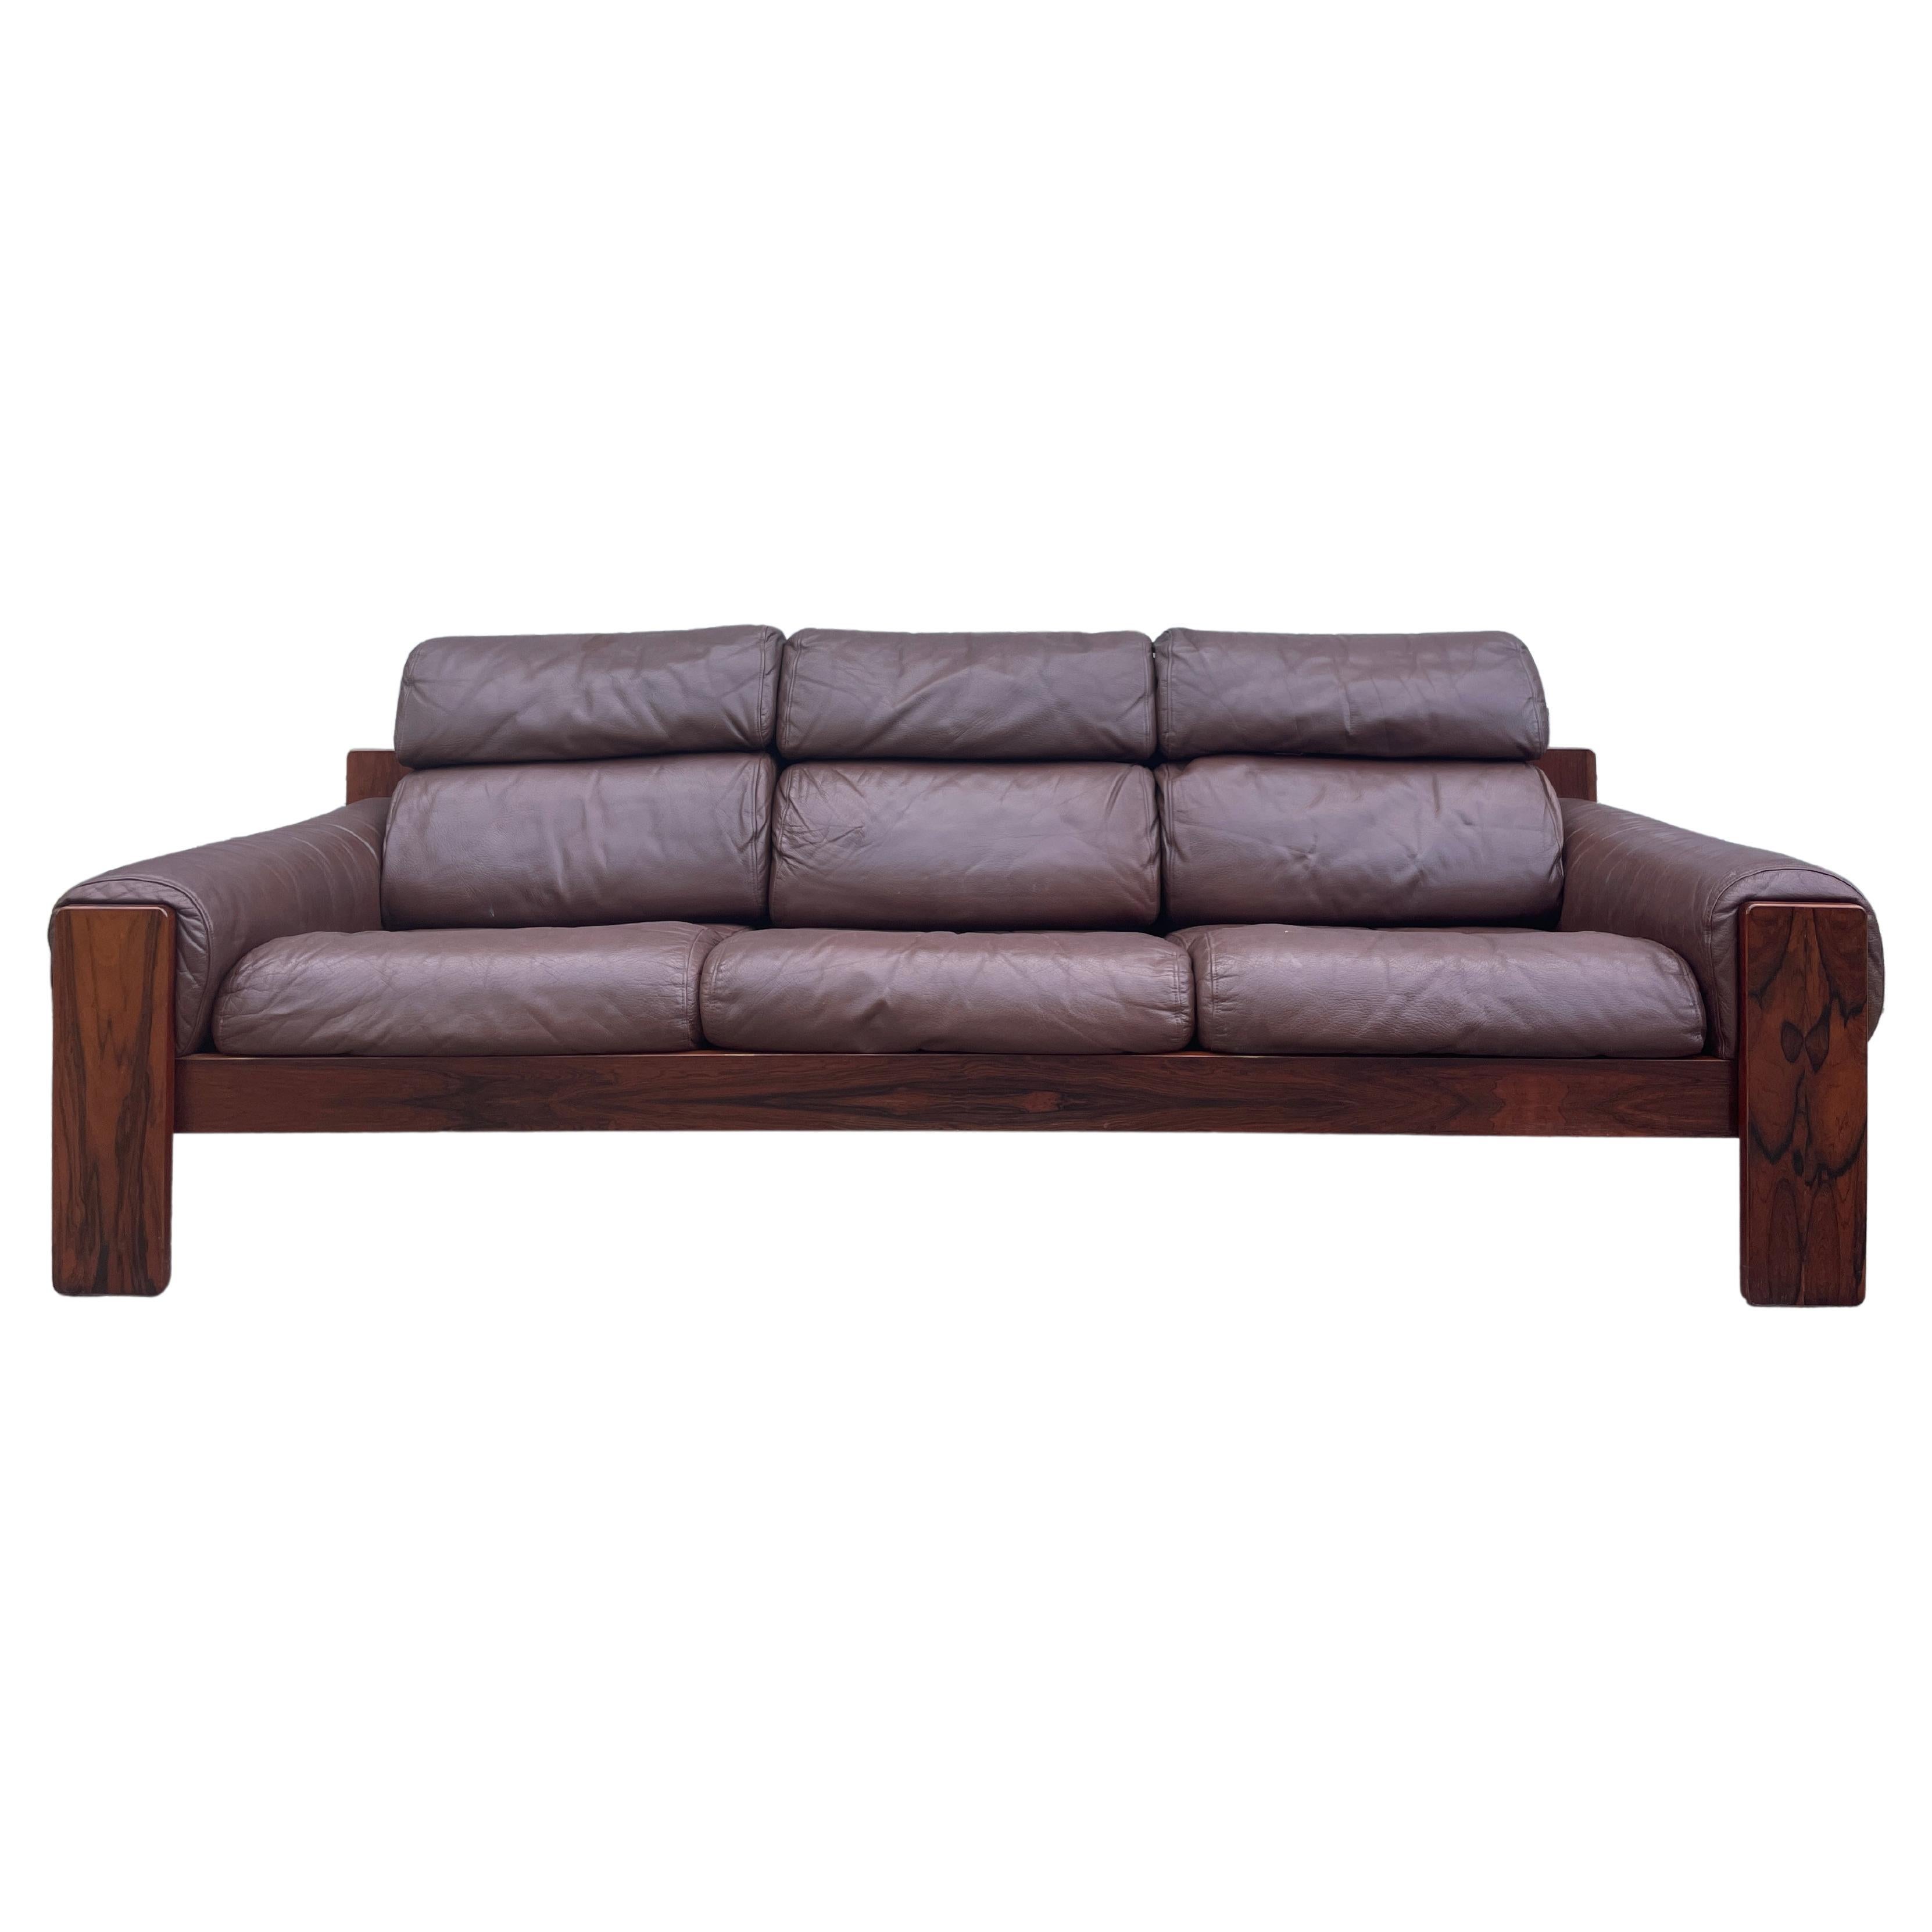 Superb Mid-Century Scandinavian Modern Leather Rosewood Sofa from Finland